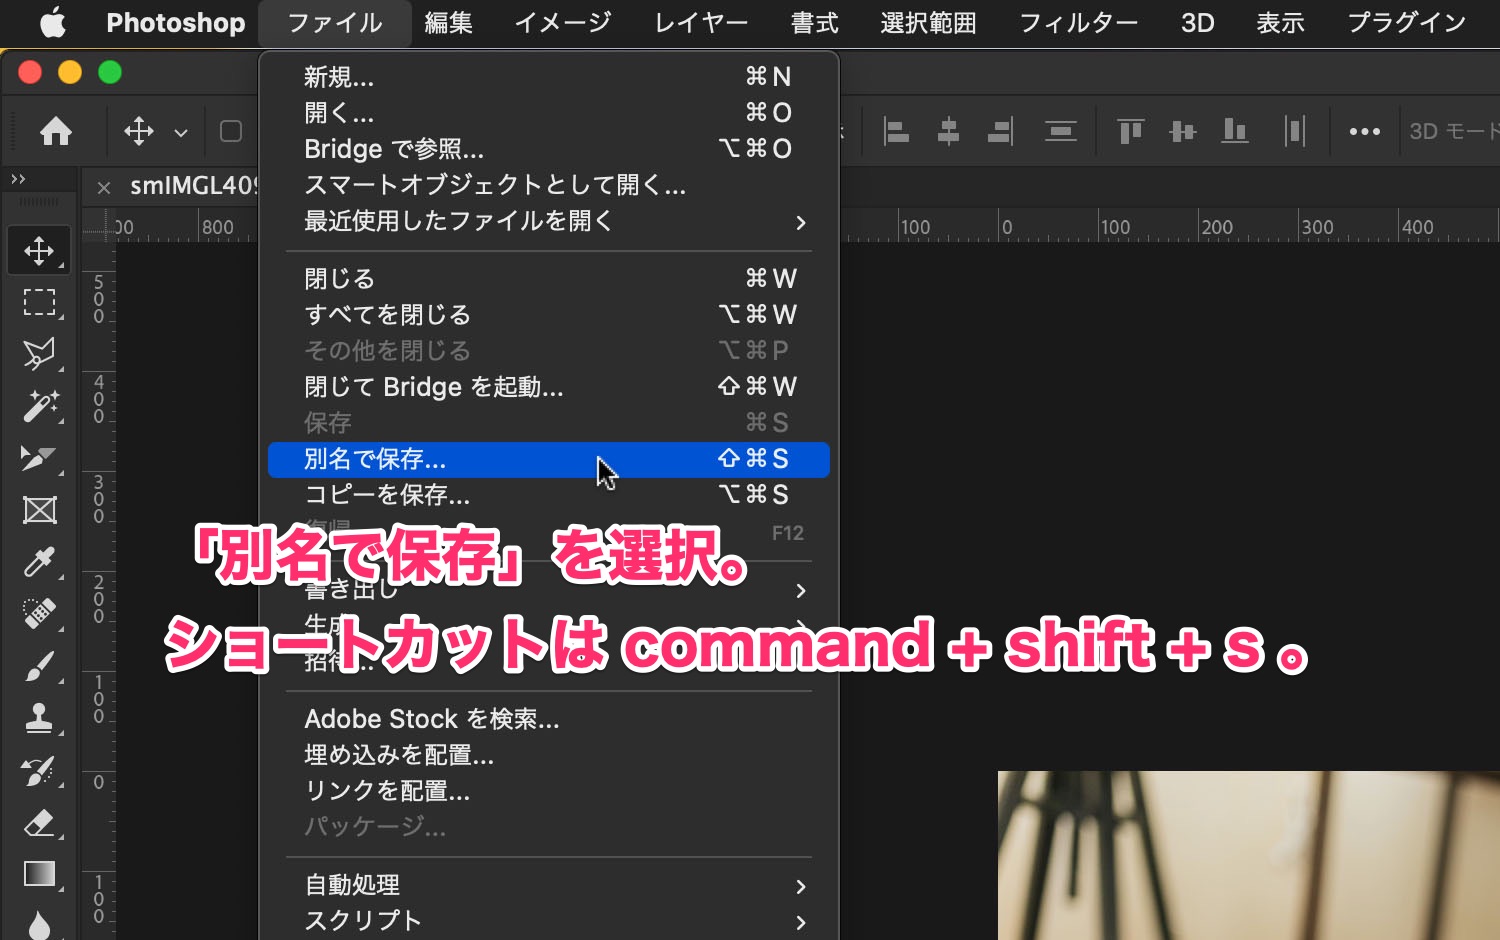 The 'save as' shortcut is command+shift+S